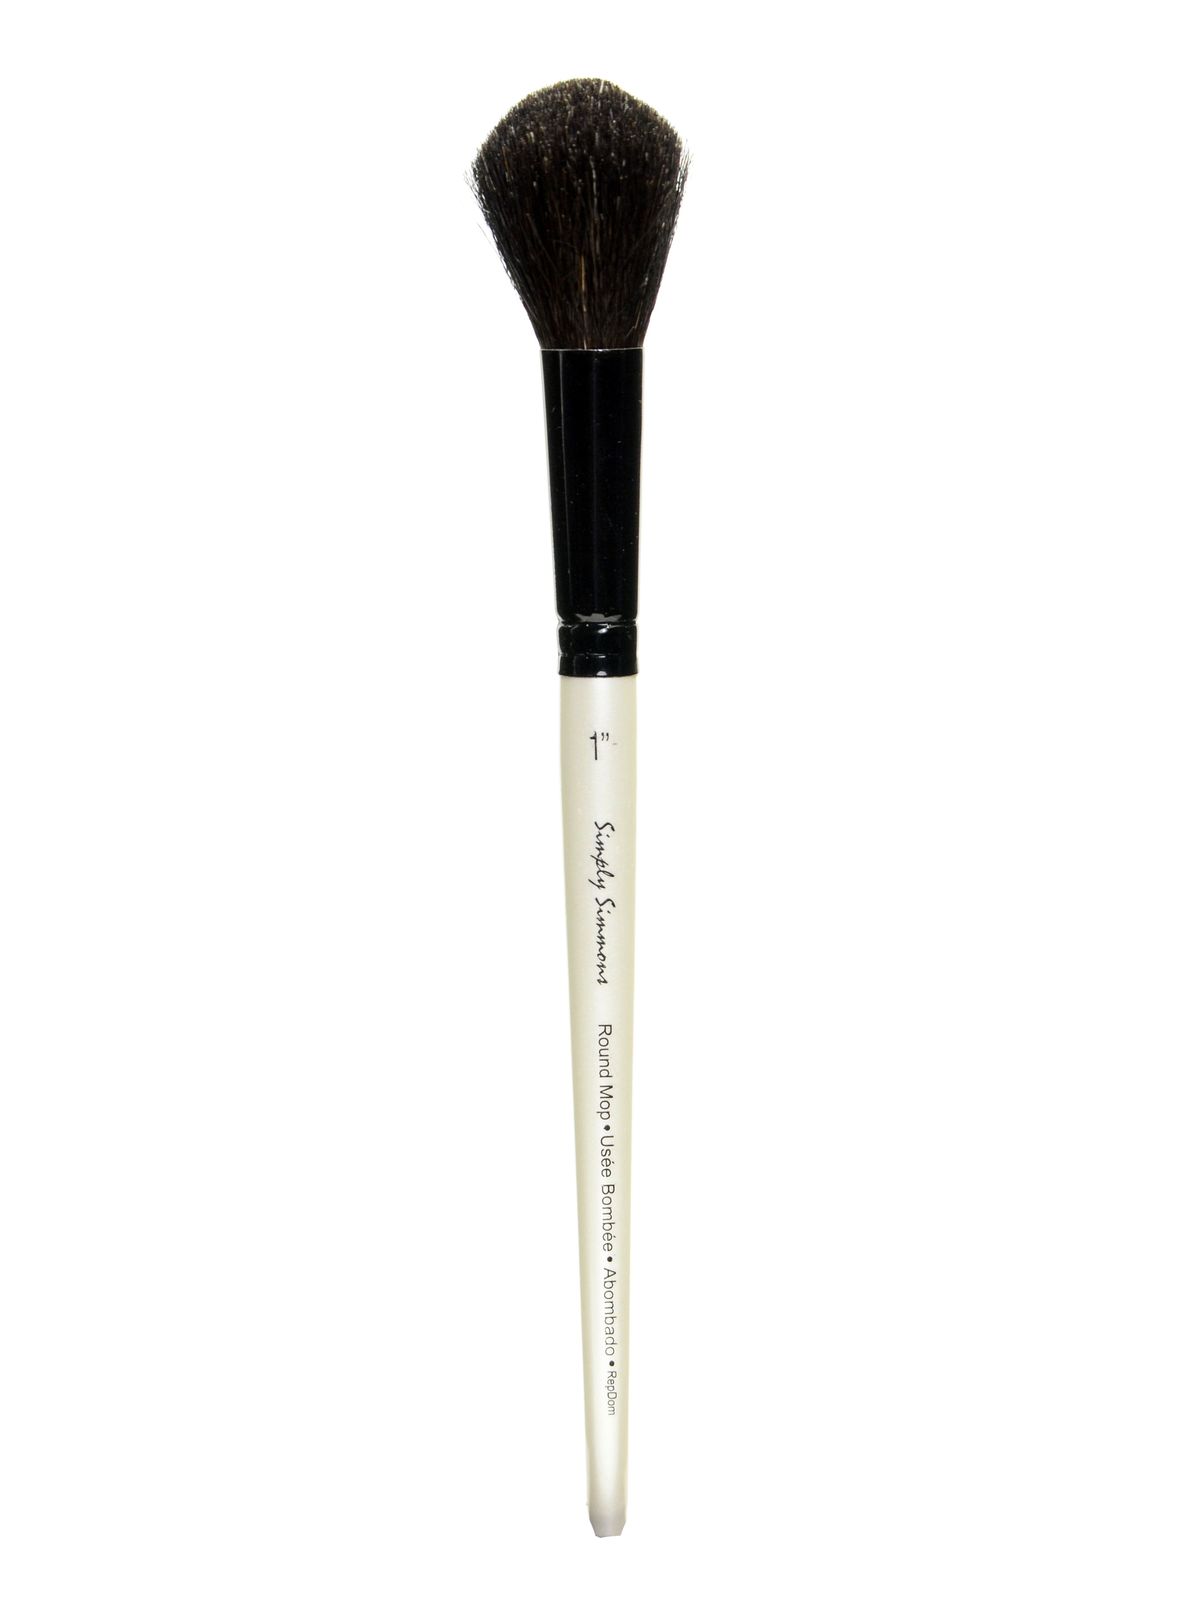 Simply Simmons Watercolor & Acrylic Short-handle Brushes 1 In. Round Mop Natural Black Goat